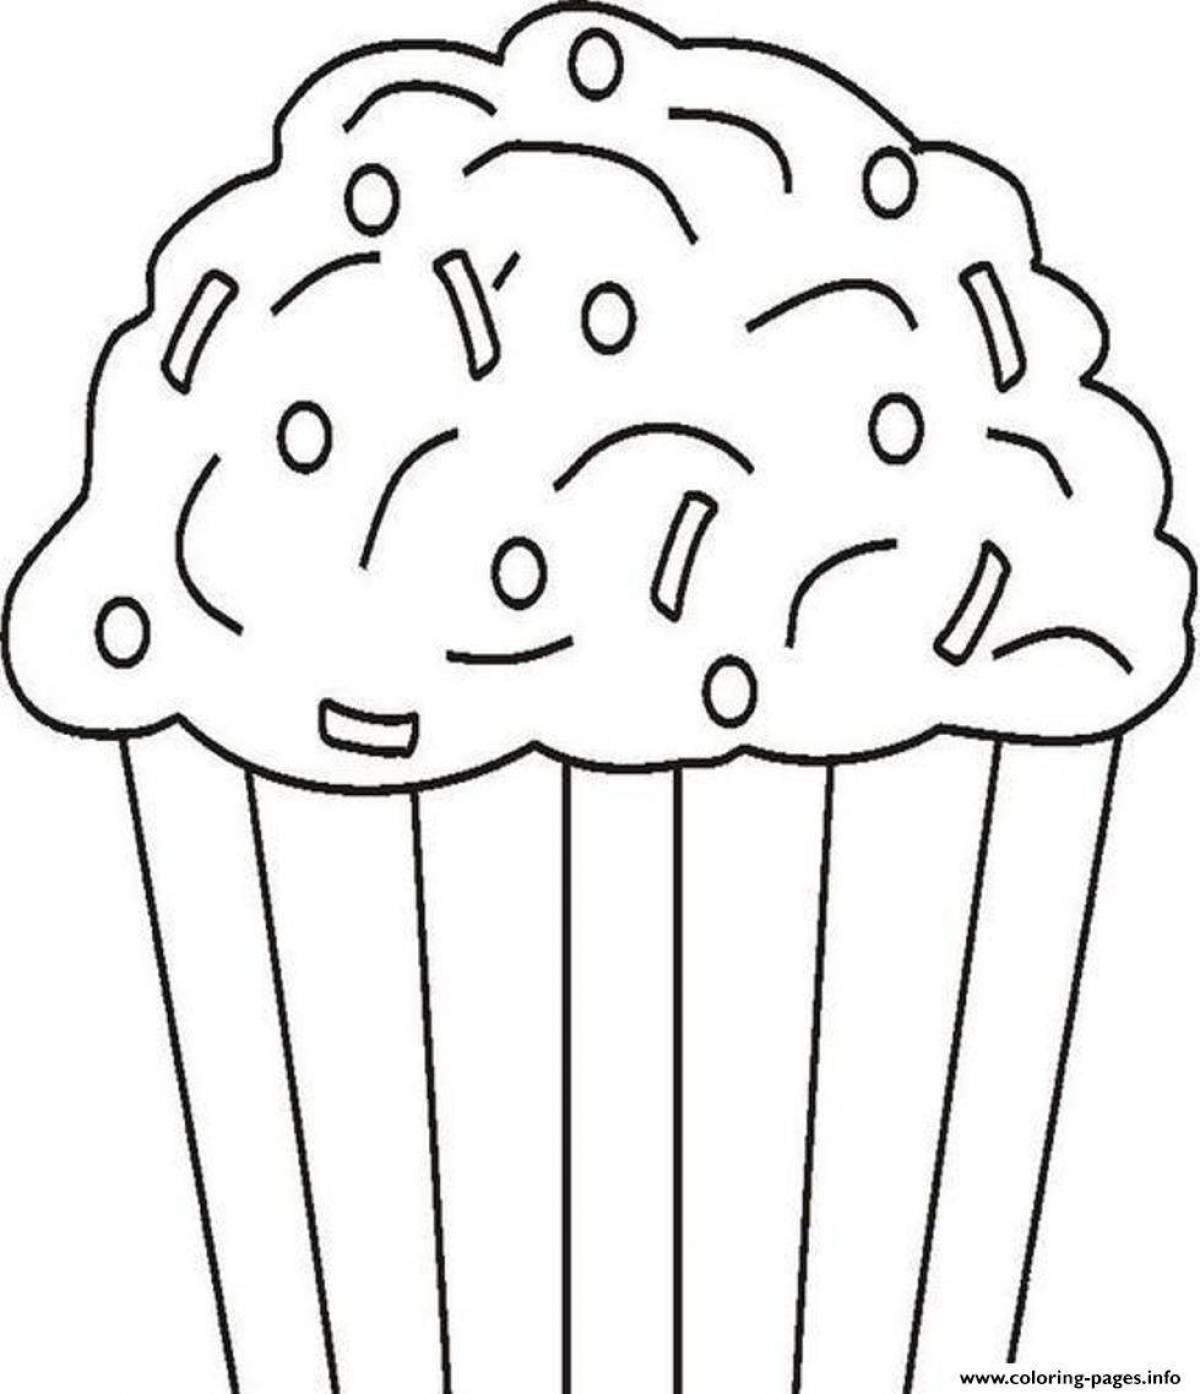 Cute cupcake coloring page